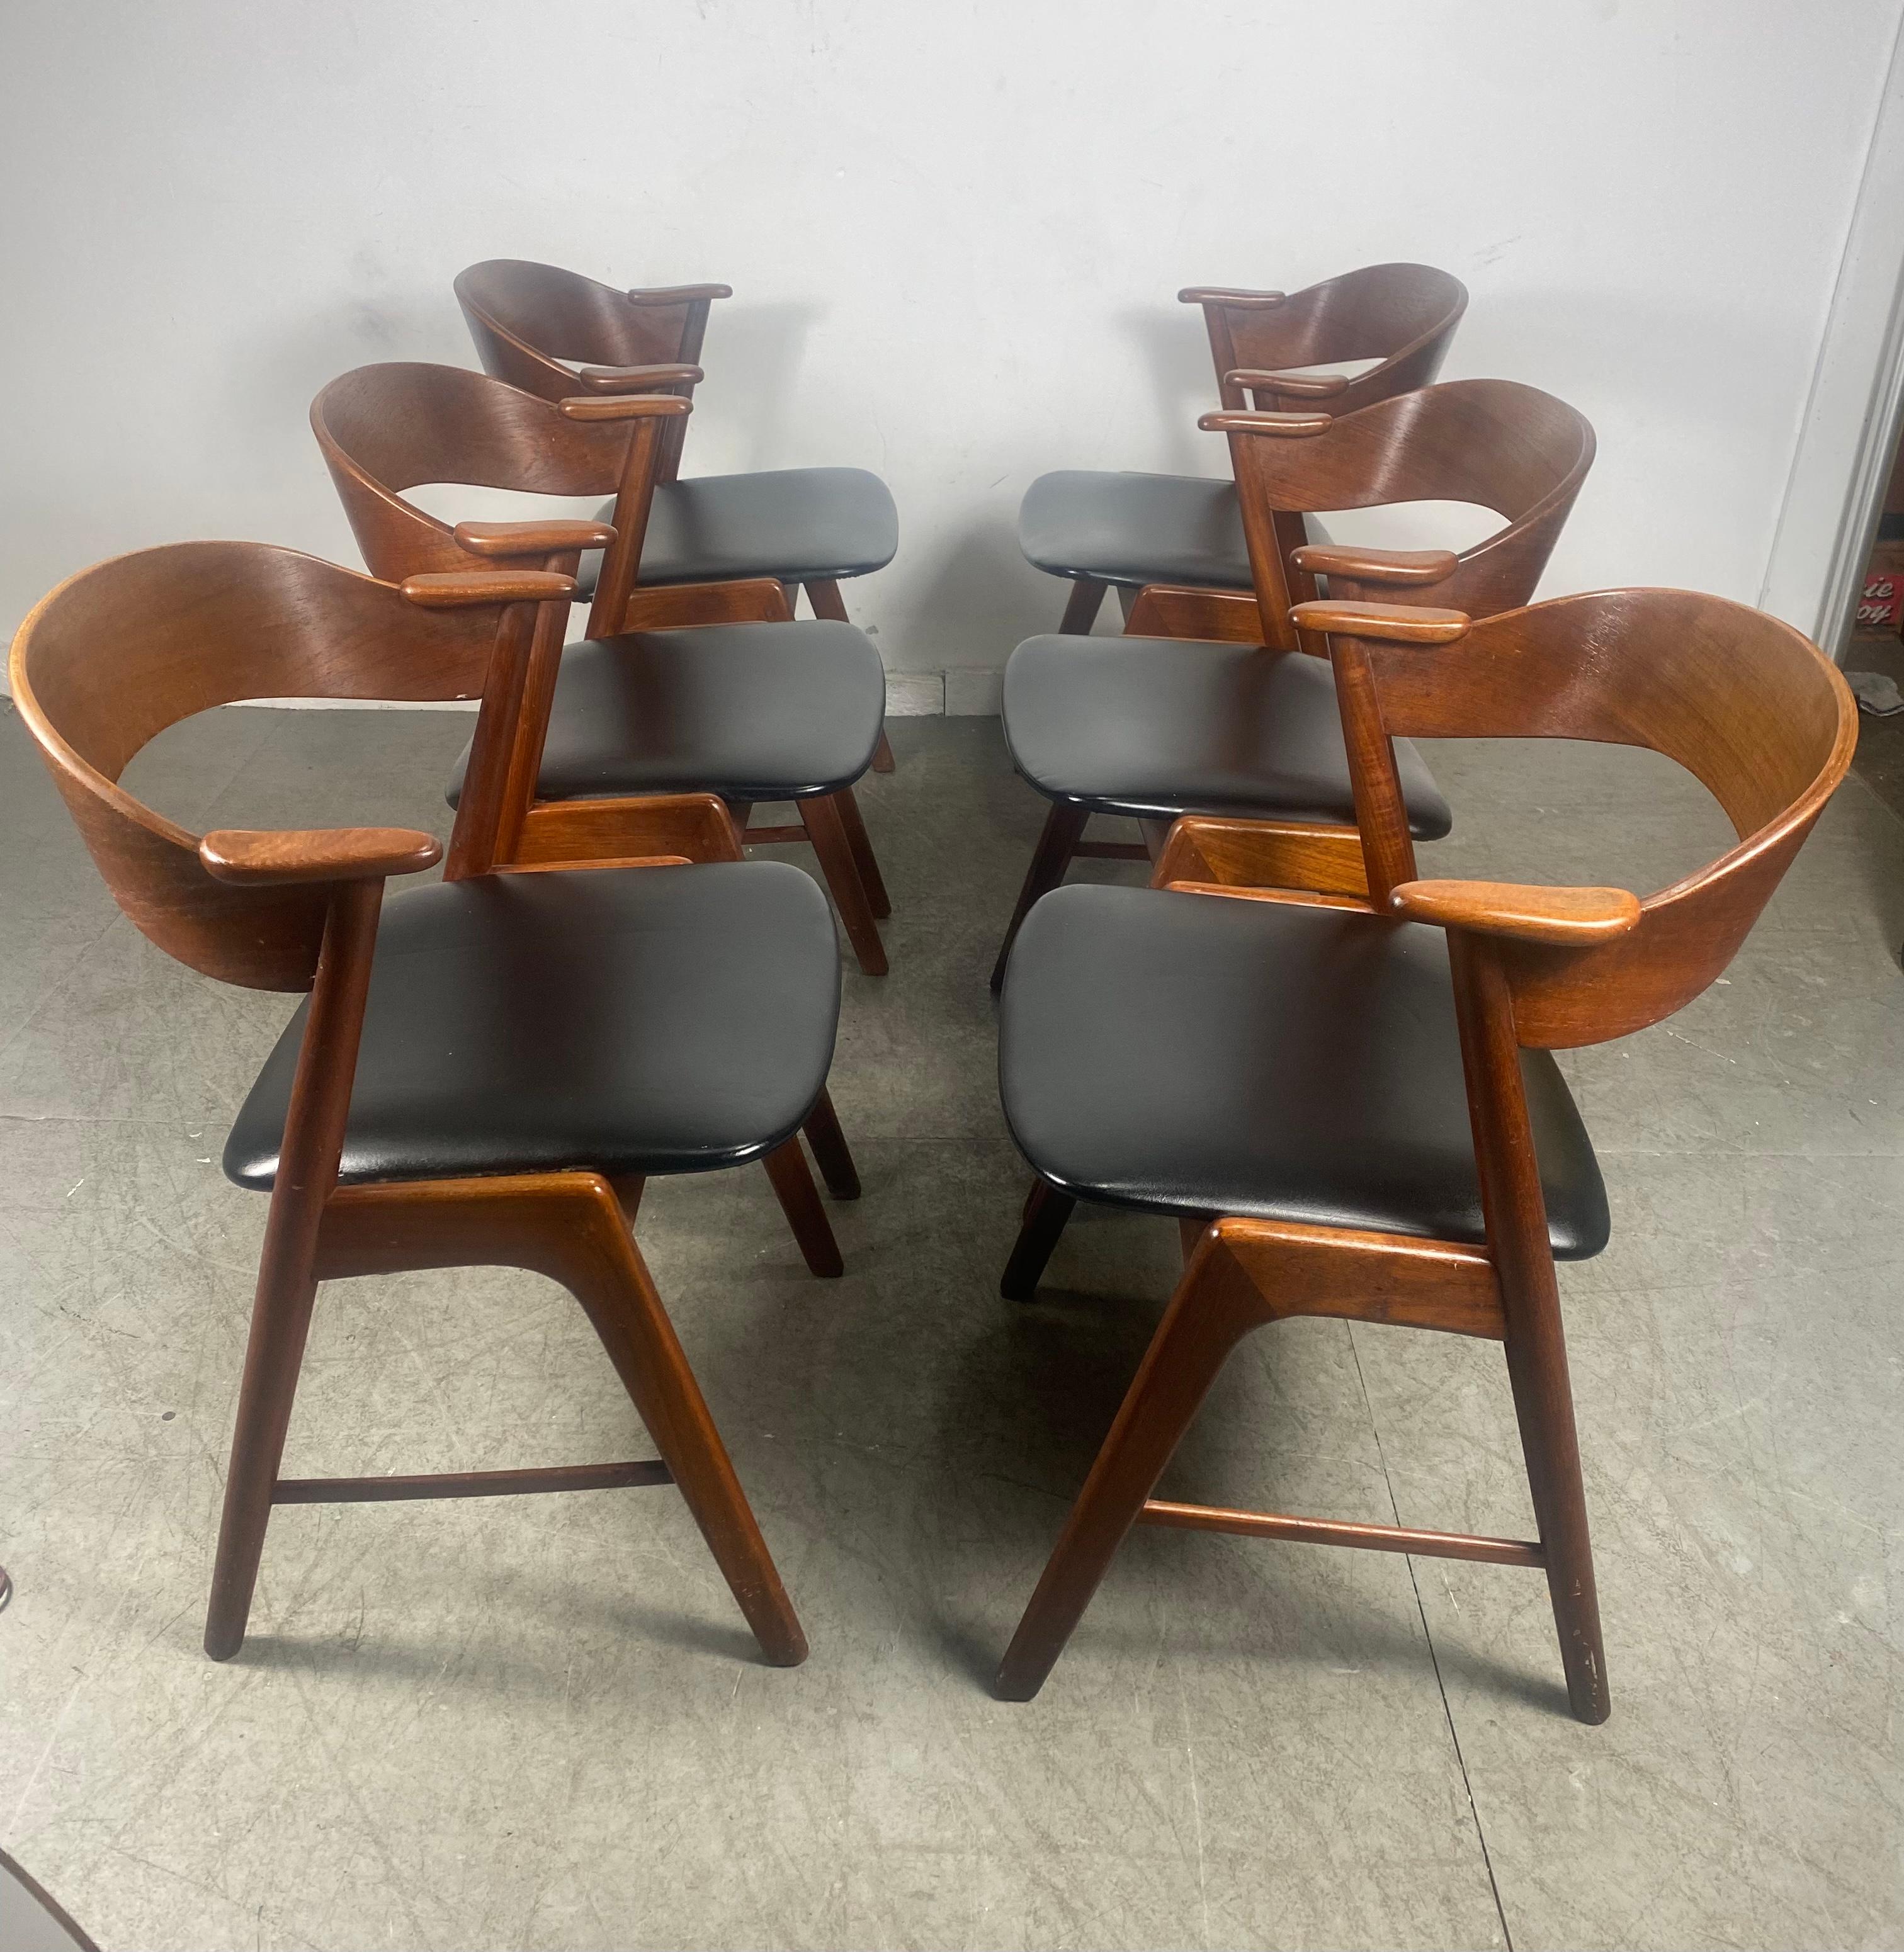 Set 6 sculptural teak dining chairs by Kai Kristiansen for K.S.Moblier / Denmark. Nice original condition. Finish and patina. Extremely comfortable, superior quality and construction. Tight joints, sturdy, Classic Danish Modernist design. Hand